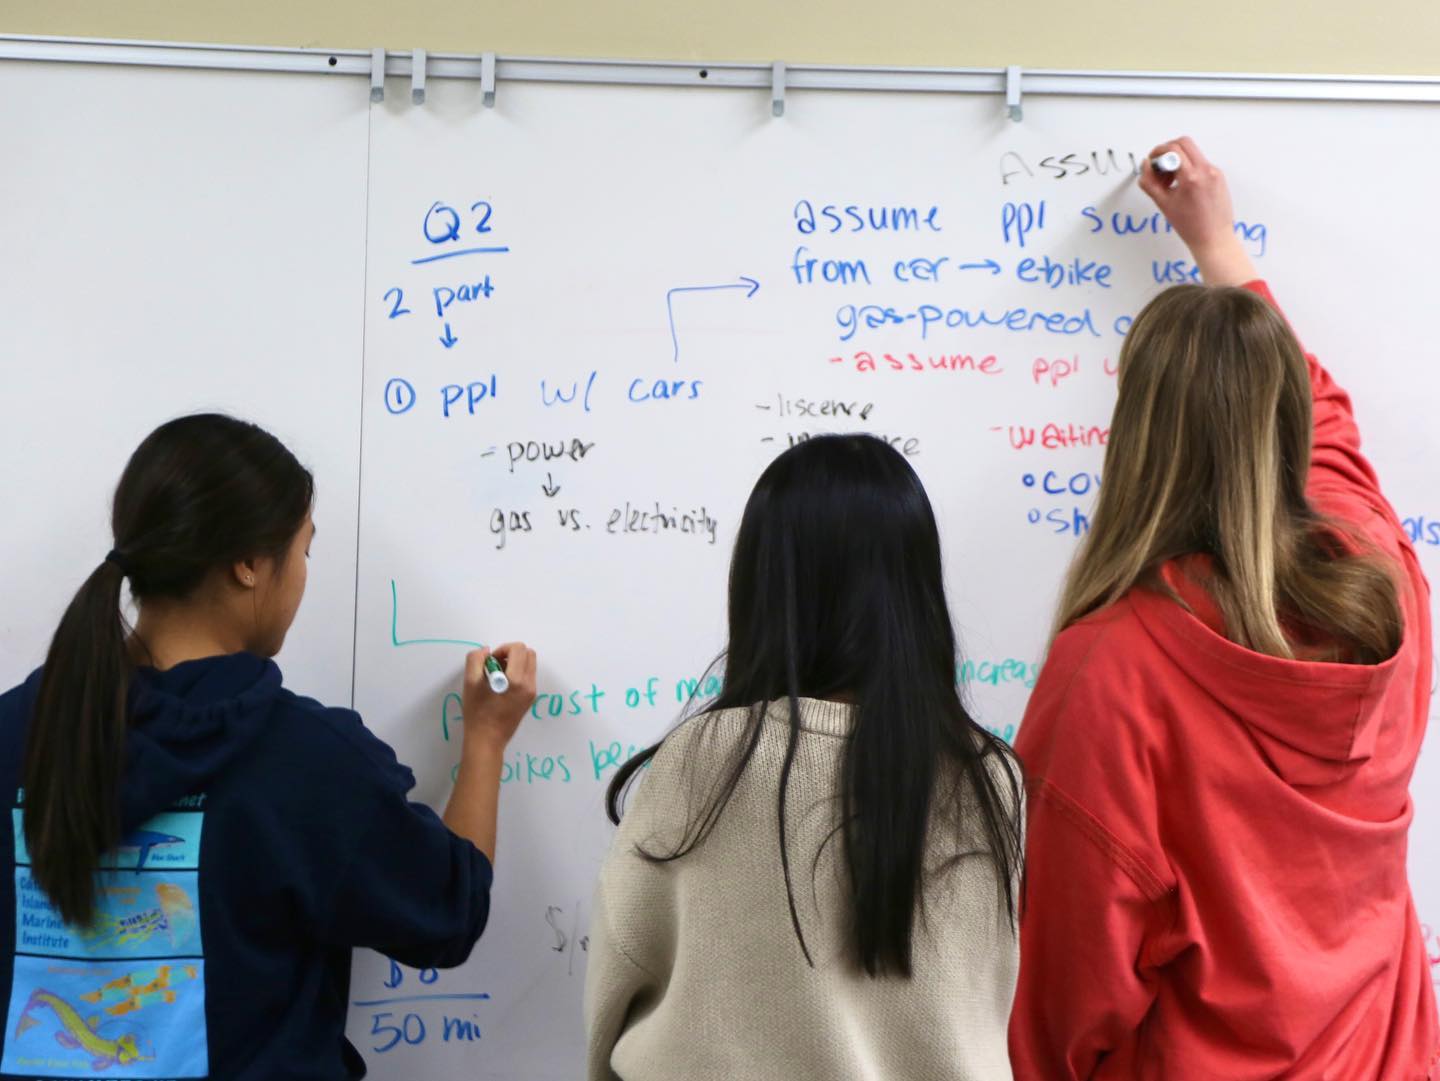 Three students writing on a whiteboard.